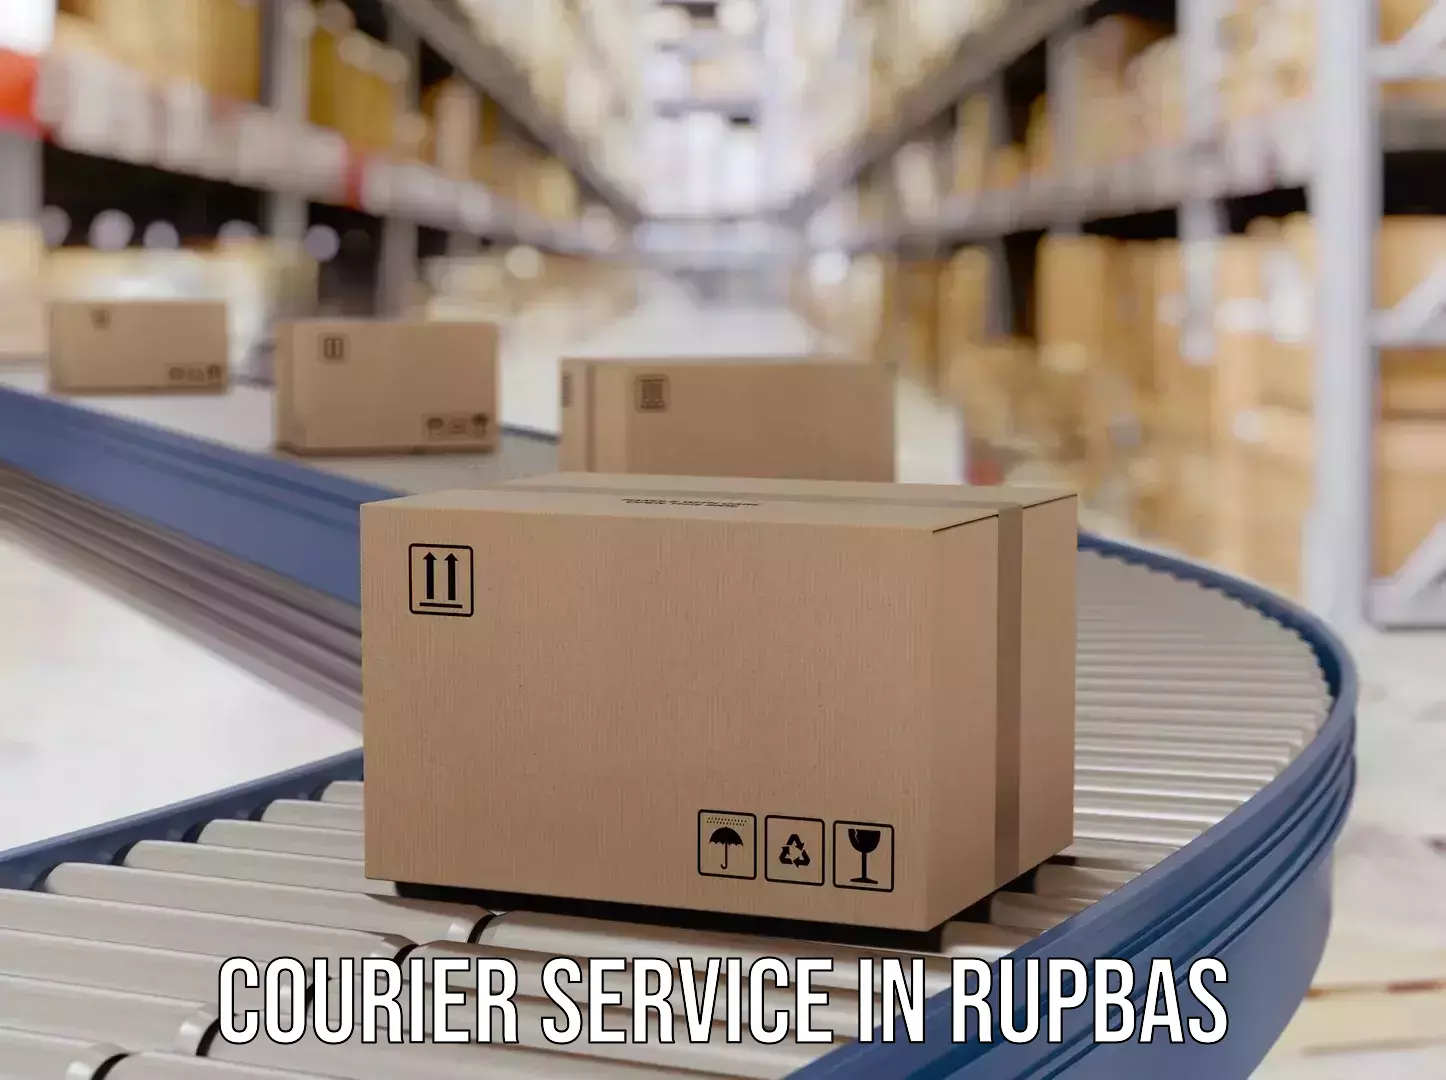 Customer-oriented courier services in Rupbas